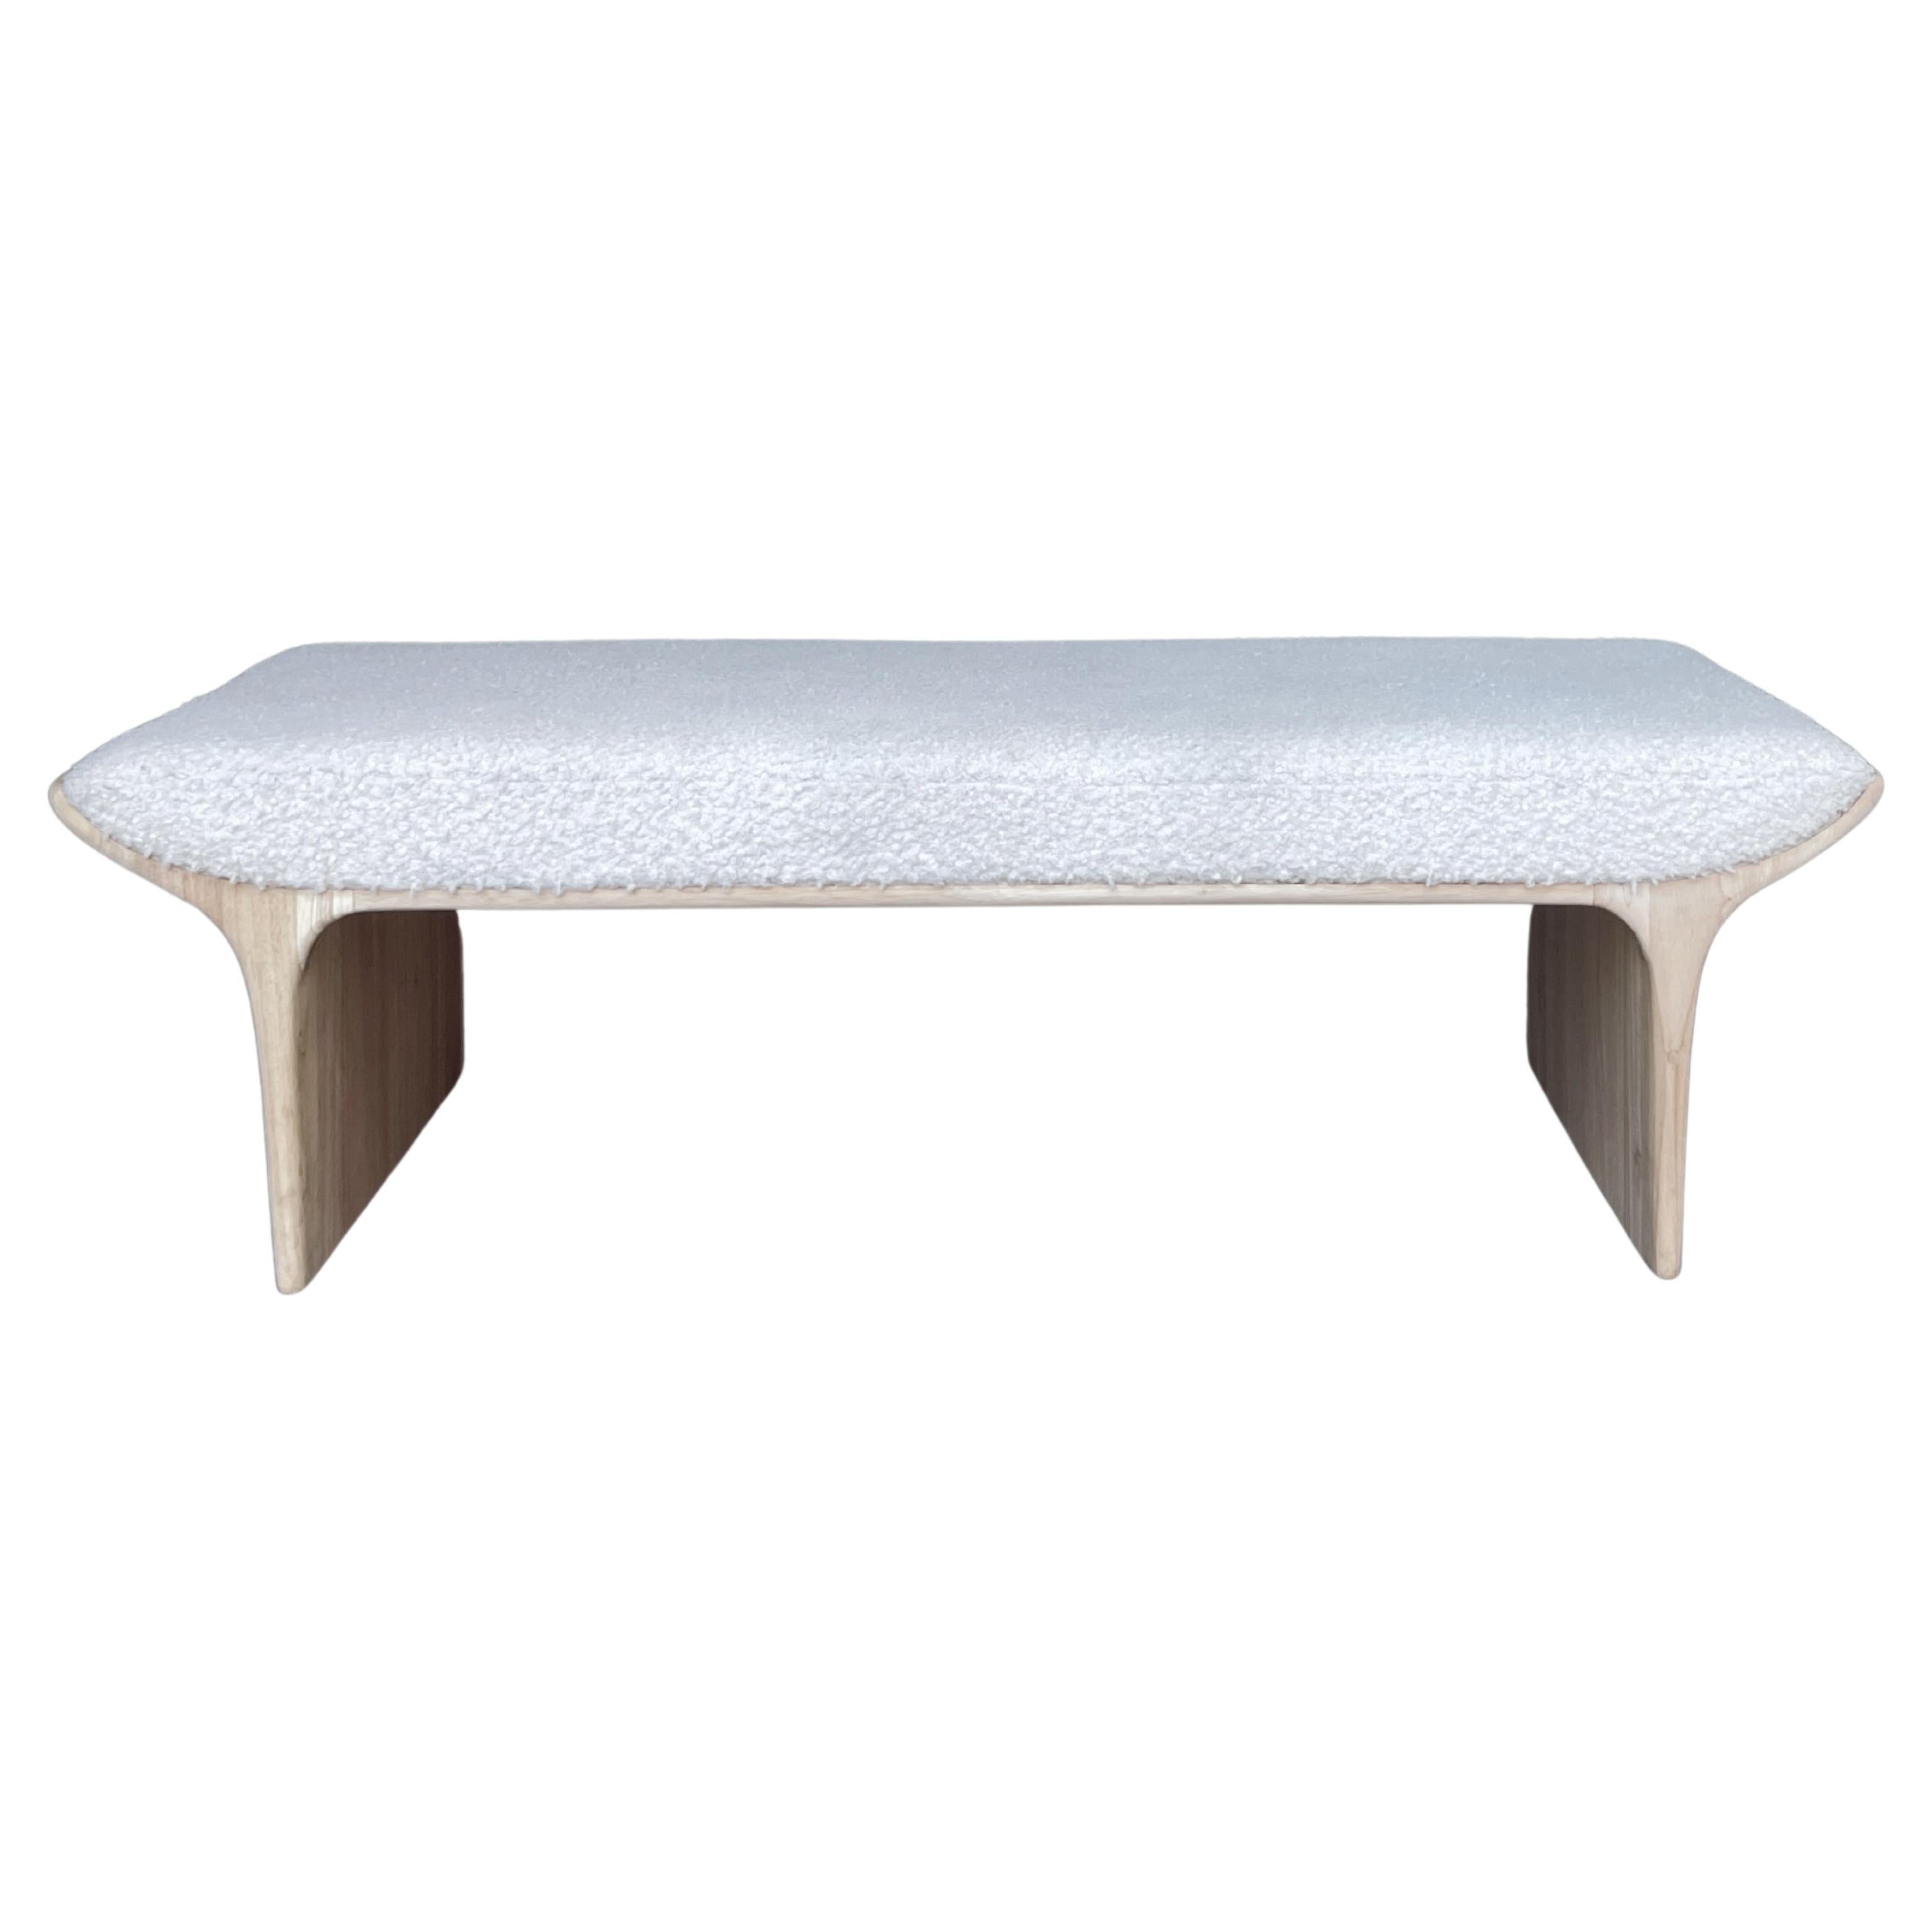 Sculptural waterfall bench, crafted from solid hardwood, with Boucle upholstery.
A timeless minimalist design, organic curves which are accentuated by the luster of a tradition Scandinavian natural soap finish. The generously deep seat makes this